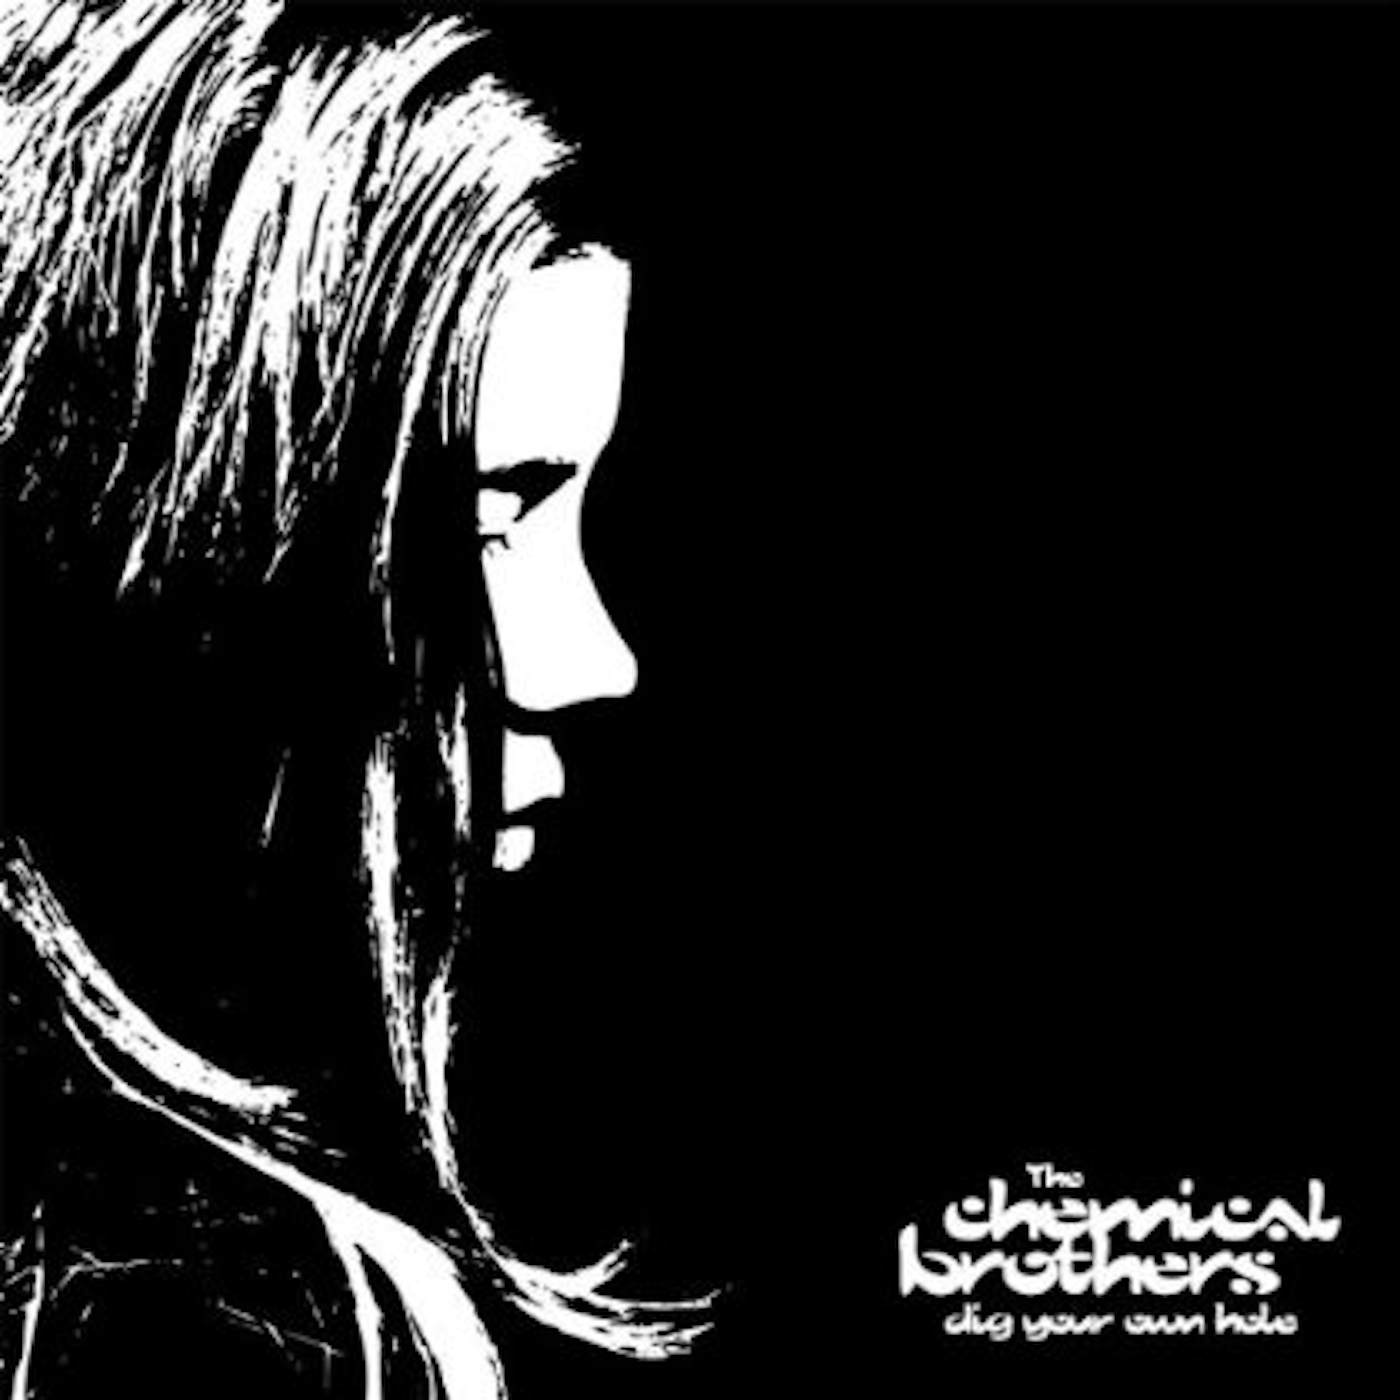 The Chemical Brothers DIG YOUR OWN HOLE CD